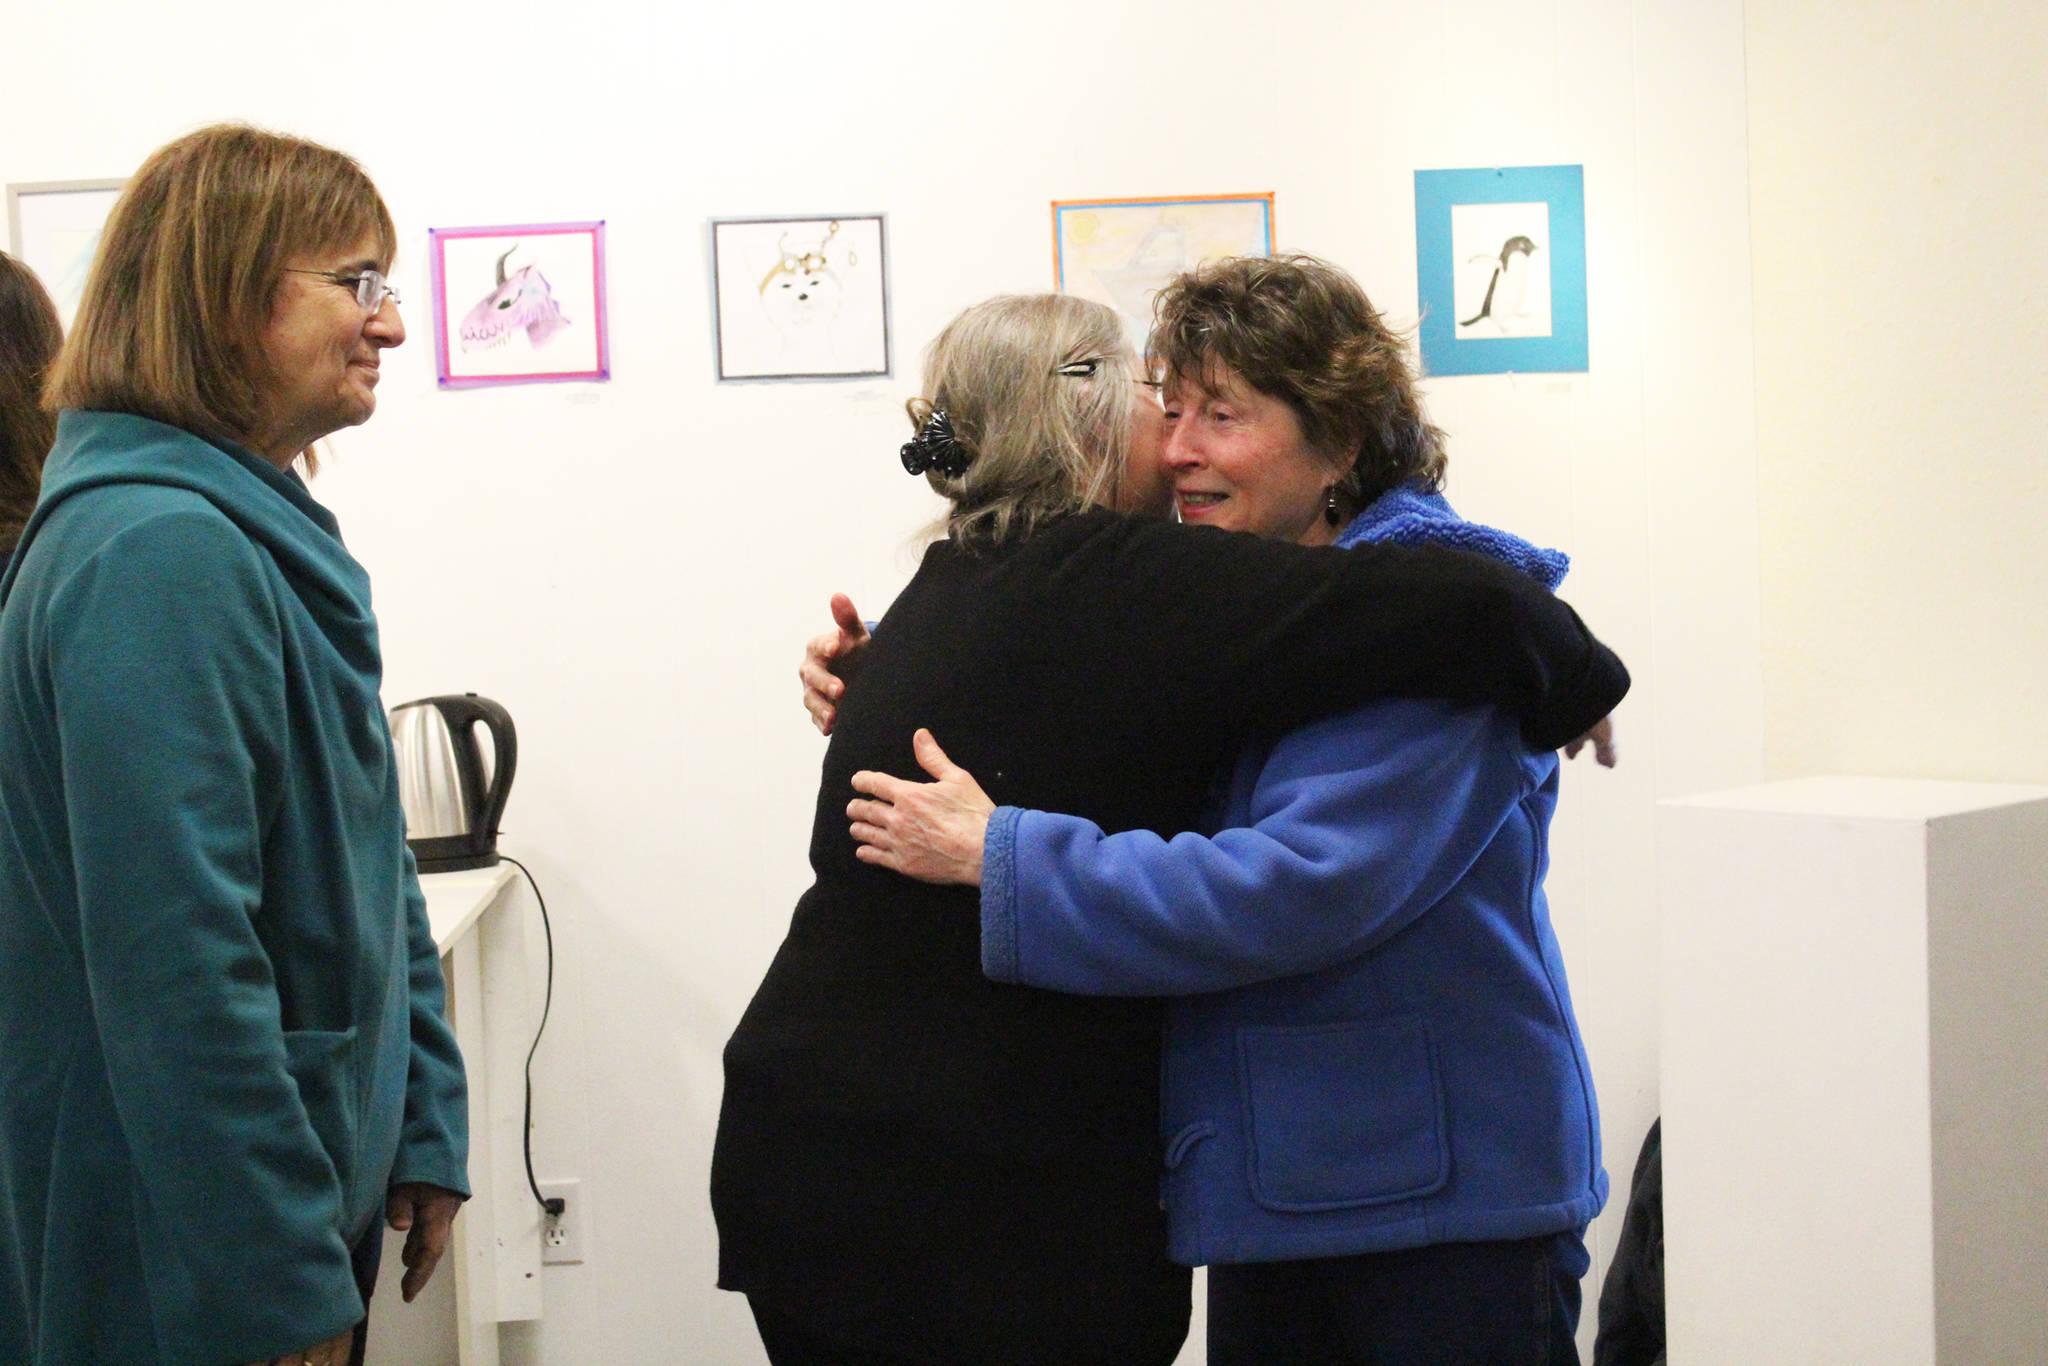 Darlene Hilderbrand gets a hug from a friend at a surprise party held to celebrate her retirement Sunday, March 18, 2018 at Homer Council on the Arts in Homer, Alaska. Hilderbrand worked at Homer of Hospice for 19 years. (Photo by Megan Pacer/Homer News)